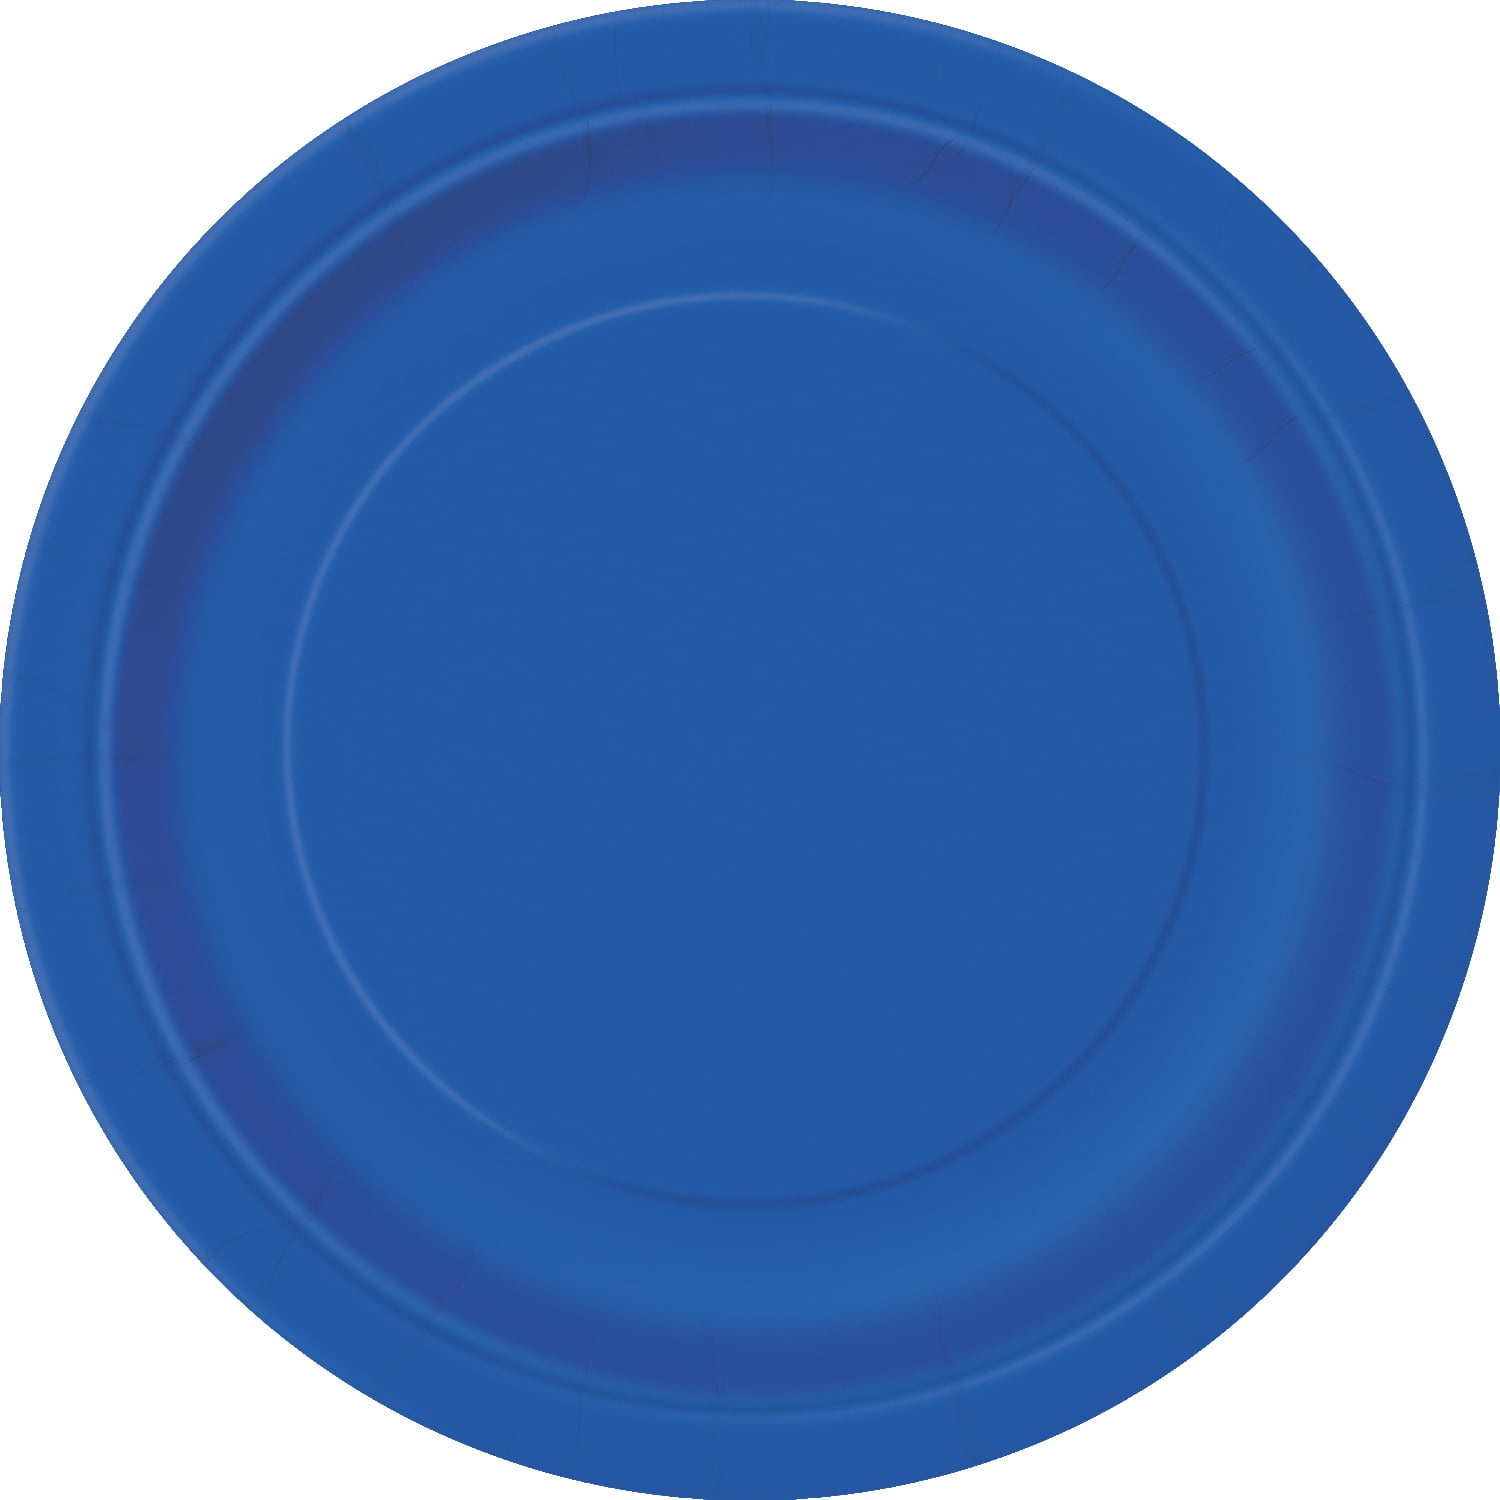 Way to Celebrate! Electric Blue Paper Dessert Plates, 7in, 24ct